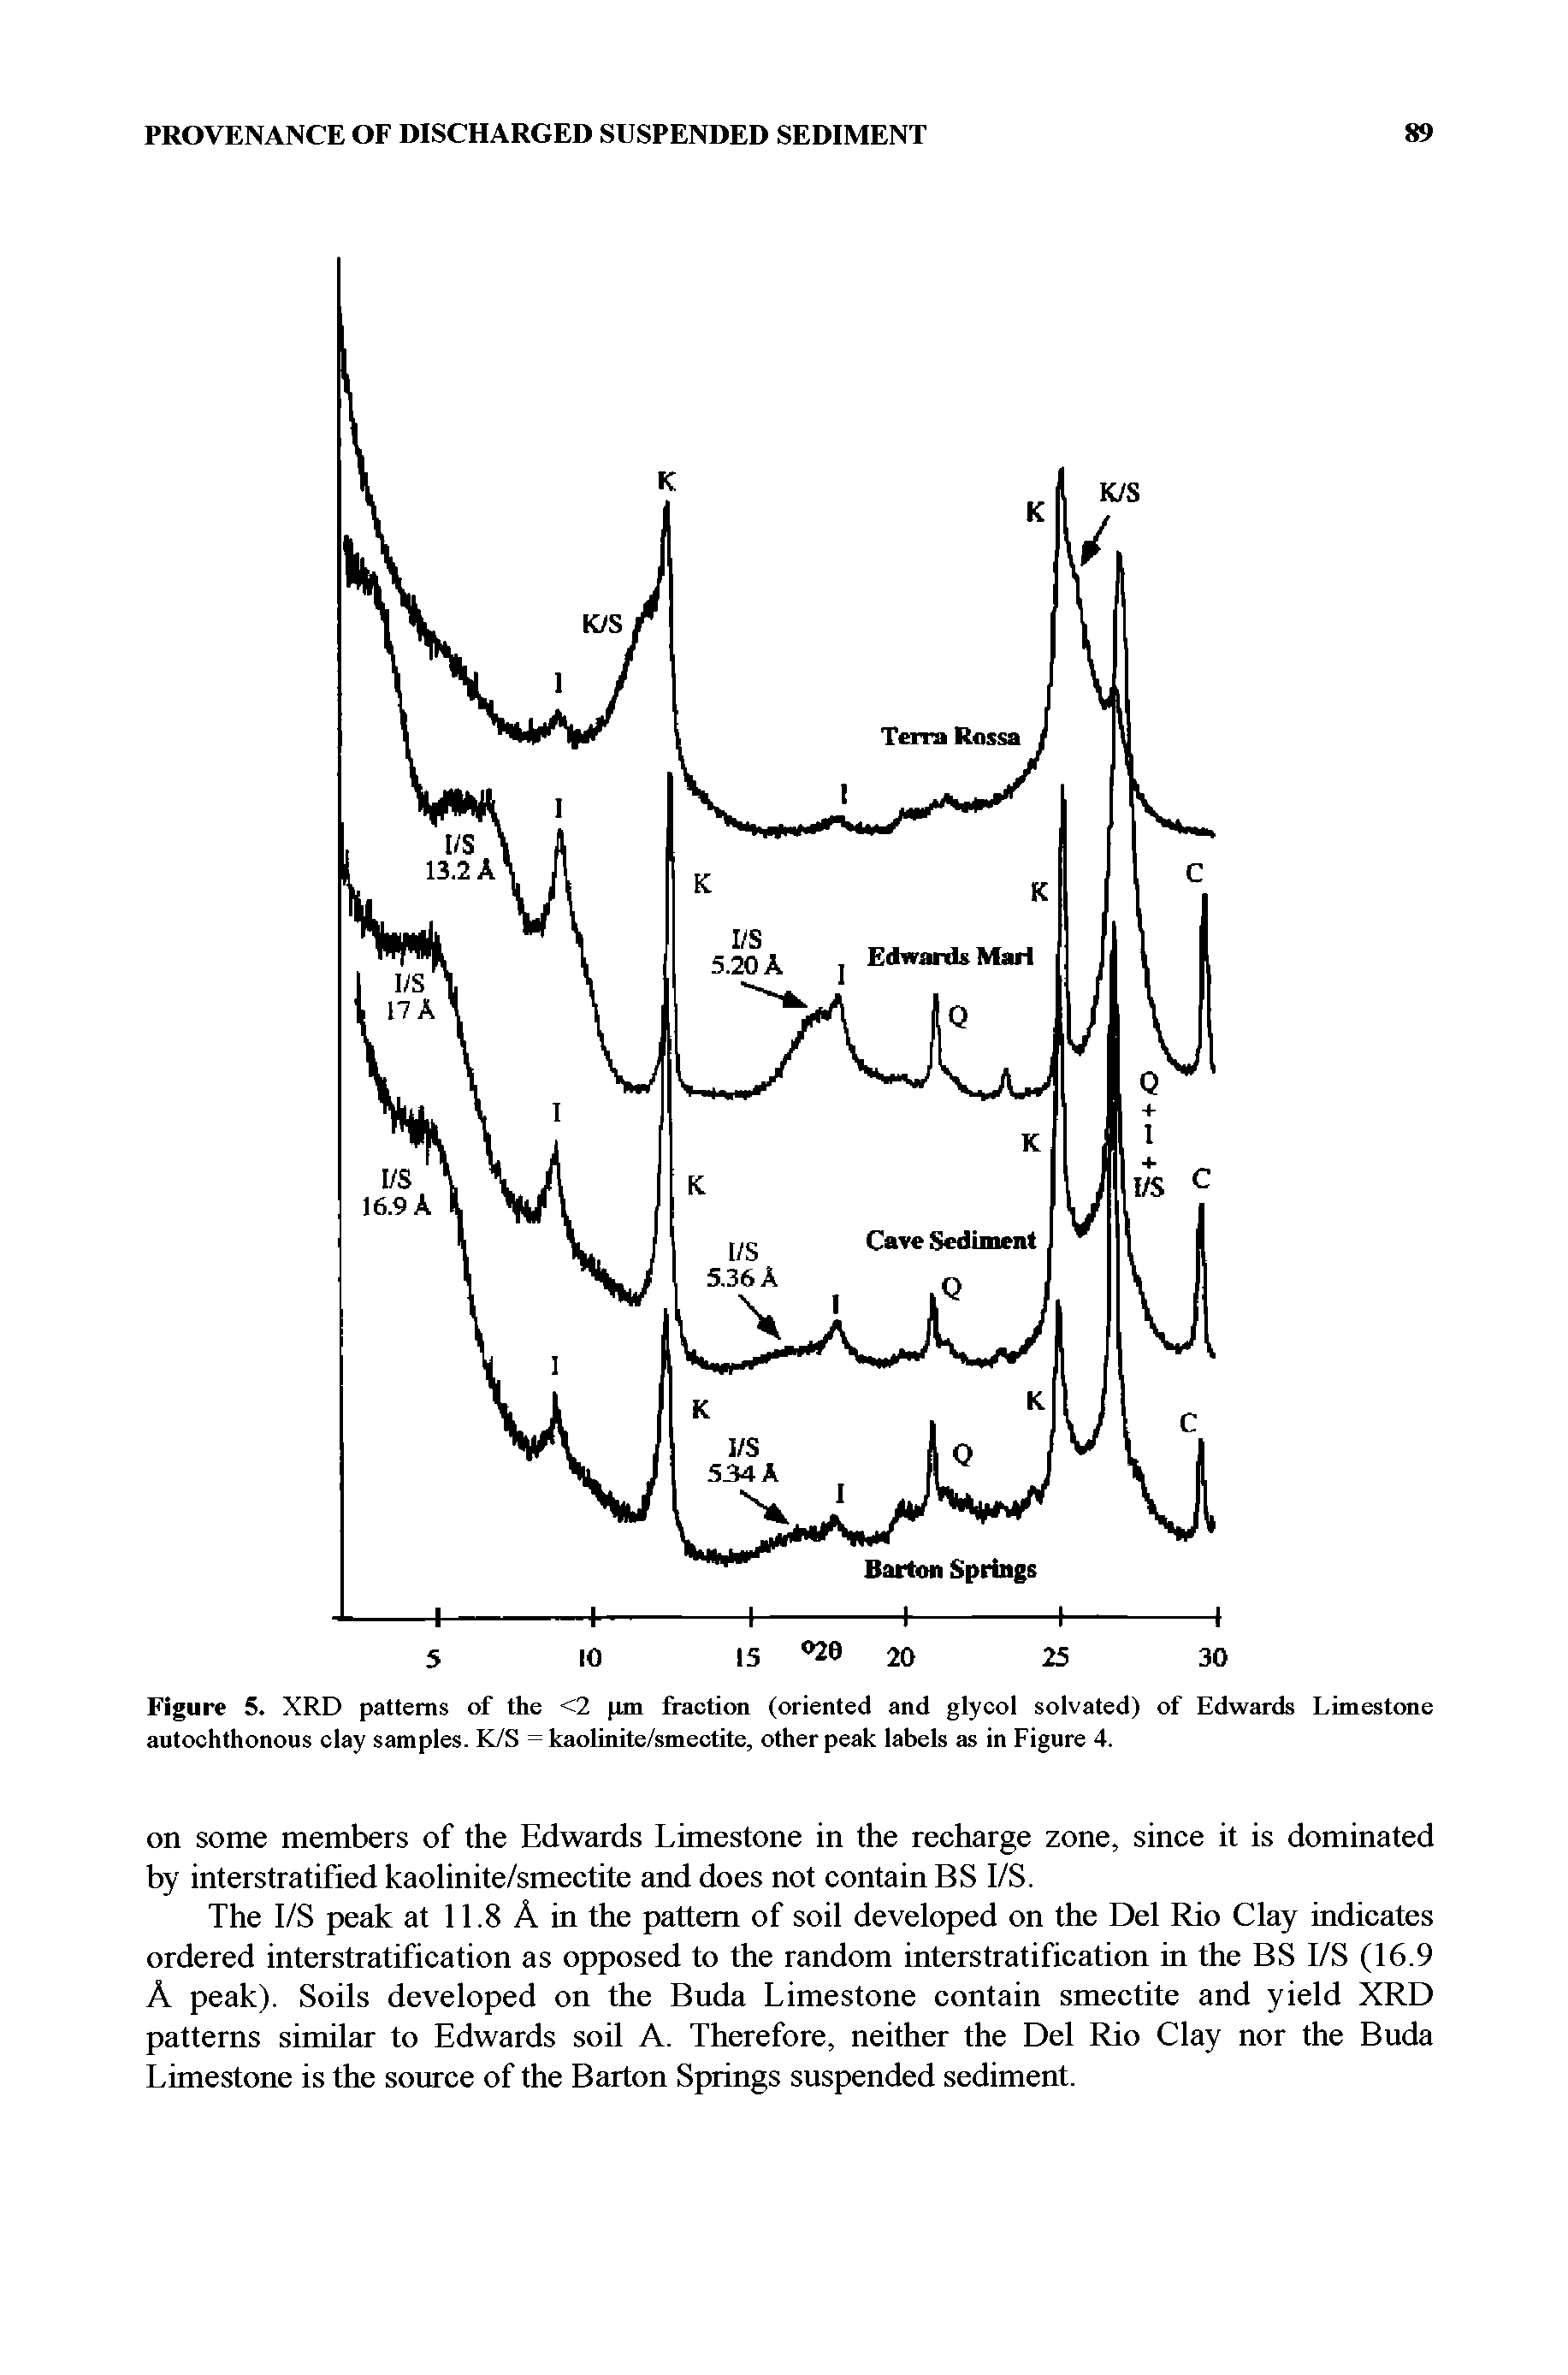 Figure 5. XRD patterns of the <2 pm fraction (oriented and glycol solvated) of Edwards Limestone autochthonous clay samples. K/S = kaolinite/smectite, other peak labels as in Figure 4.